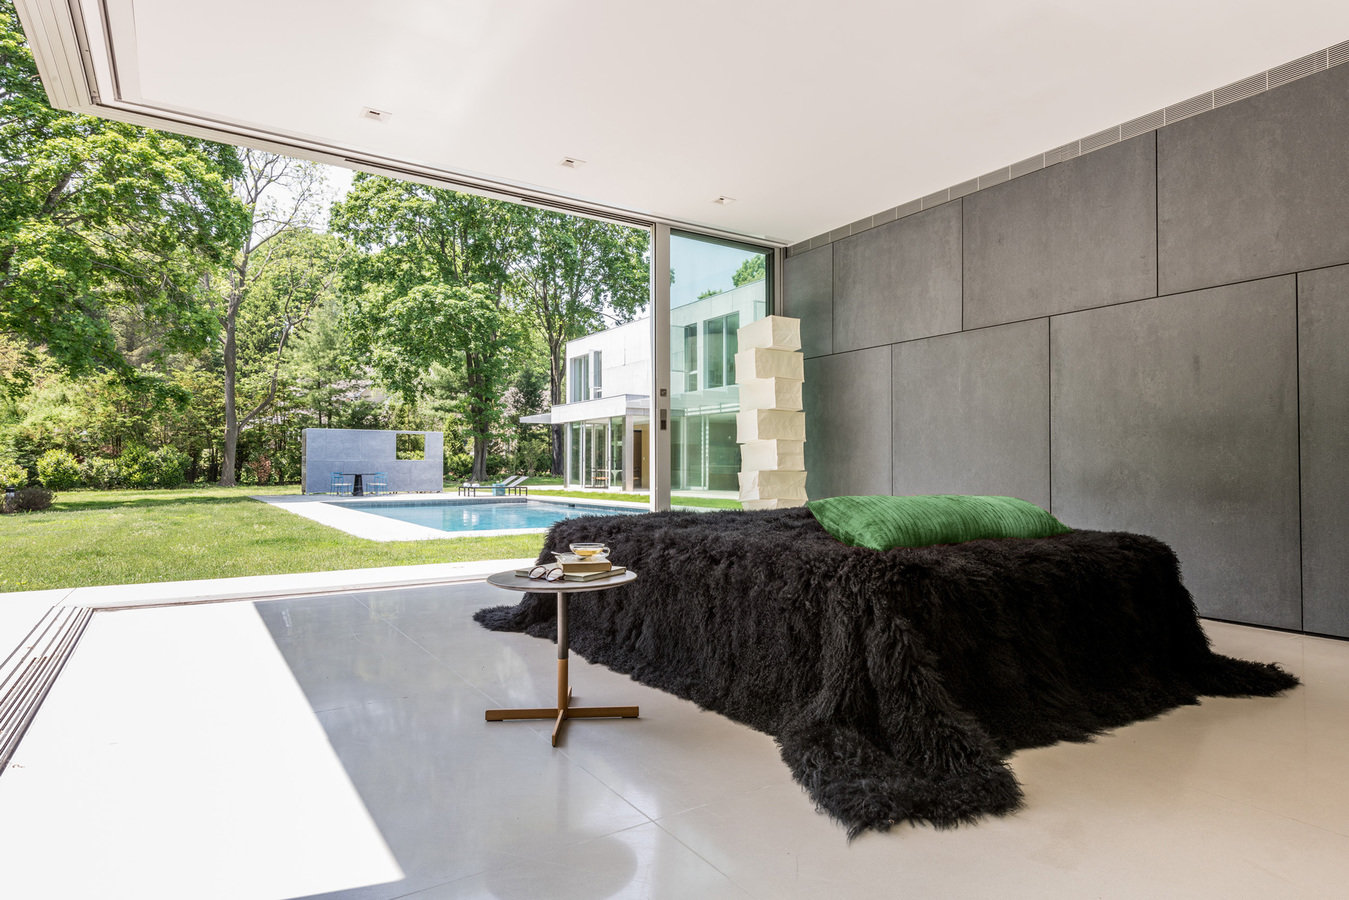 Primary bedroom with composite concrete panel wall, bed with black fur cover, sliding doors open to backyard with pool view.